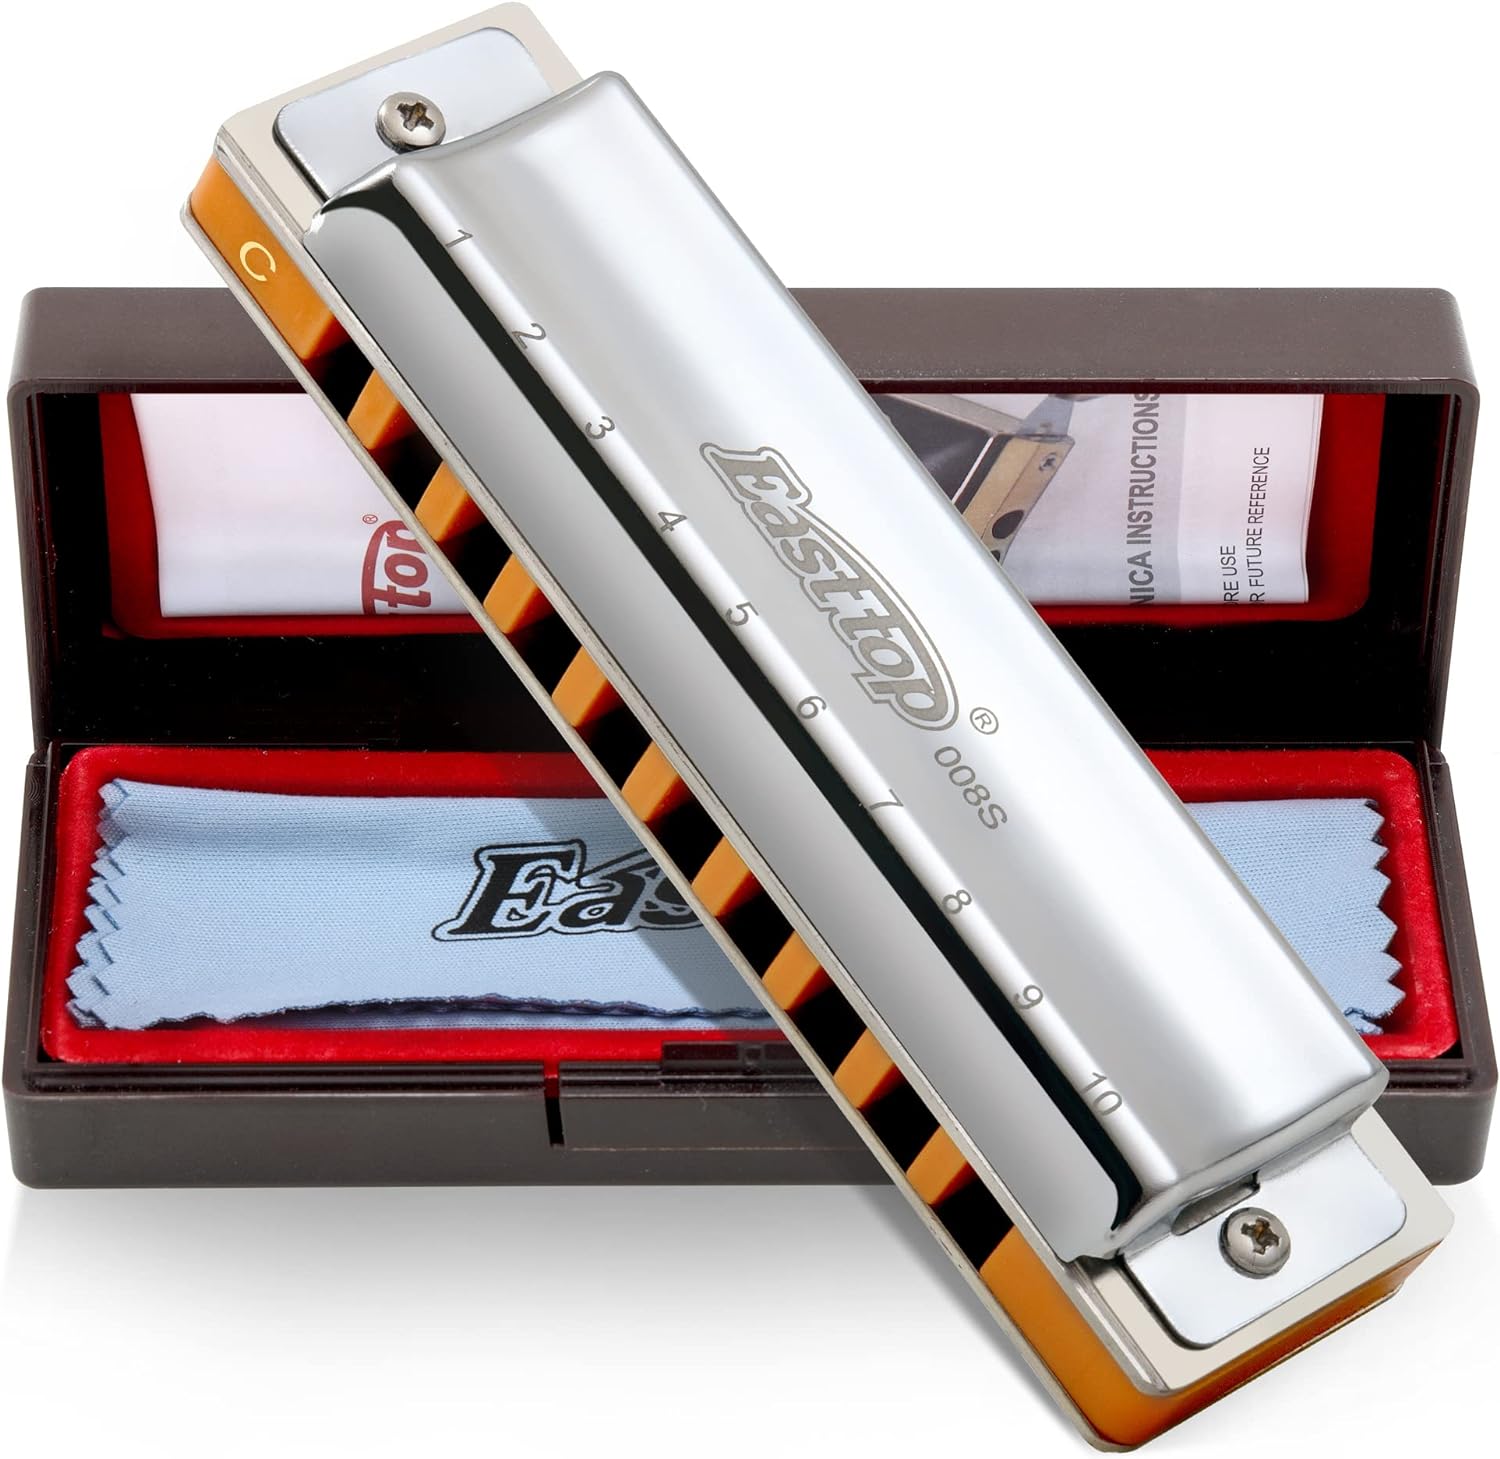 East top Harmonica, Advanced Diatonic Harmonica Key of C, 10 Holes Blues Harp Mouth Organ Harmonica with Silver Cover, Blues Harmonicas For Adults, Professionals and Students(T008S)